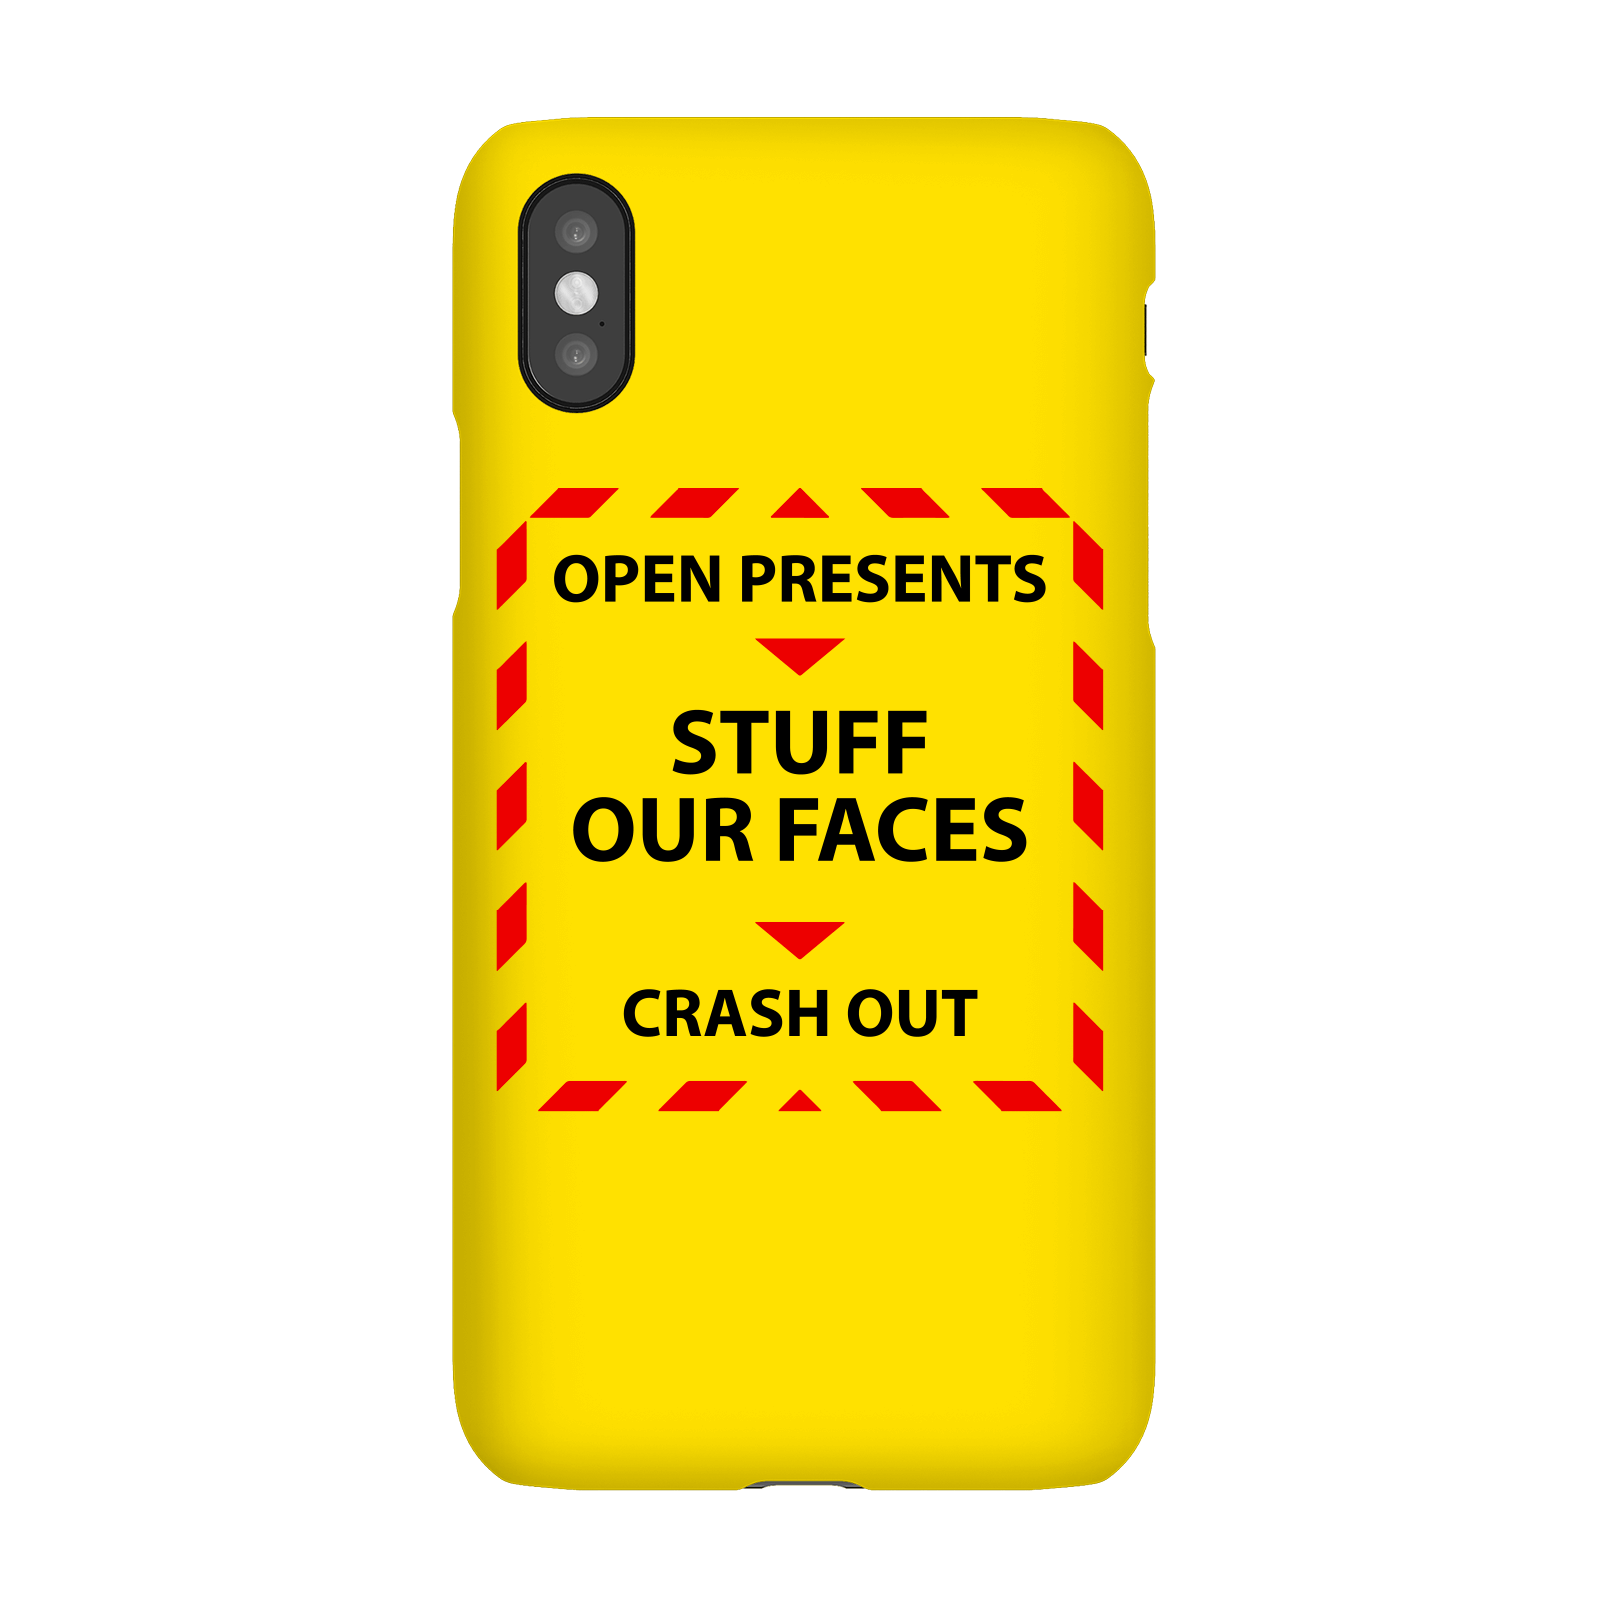 Christmas Government Guidelines Phone Case for iPhone and Android - iPhone 5/5s - Snap Case - Matte